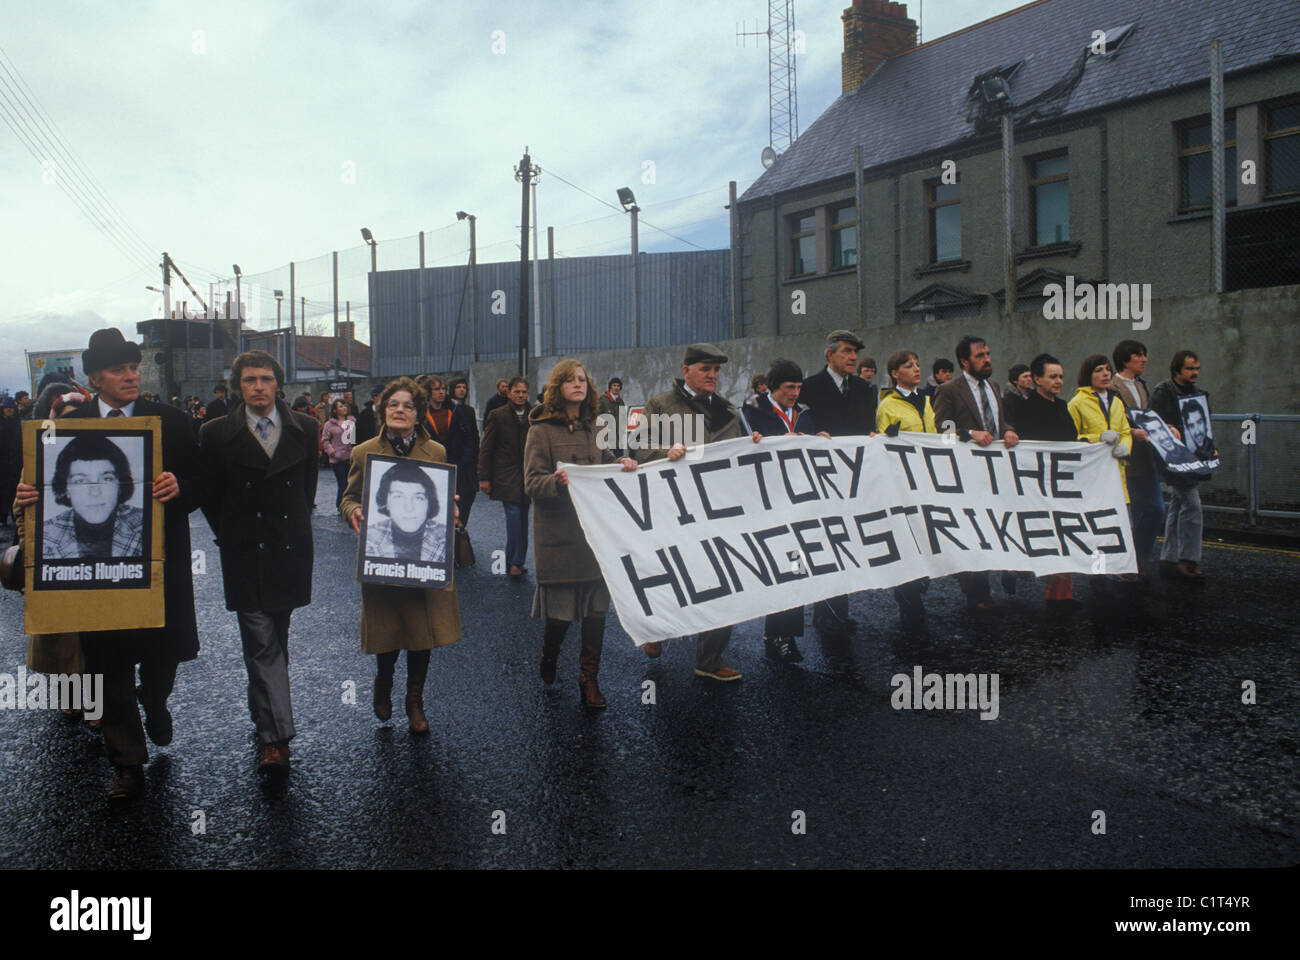 Victory to the Hunger Strikes silent march Toome or Toomebridge Northern Ireland 1981 The Troubles 1980s. Francis Hughes was an Irish volunteer in the Provisional Irish Republican Army (IRA). Hughes was the most wanted man in Northern Ireland until his arrest following an ambush by the Special Air Service (SAS) in which an SAS soldier was killed. At his trial he was sentenced to a total of 83 years' imprisonment, and he died during the 1981 Irish hunger strike in HM Prison Maze. 1980s. Poster image of  Patsy O'Hara, (extreme right)  HOMER SYKES Stock Photo